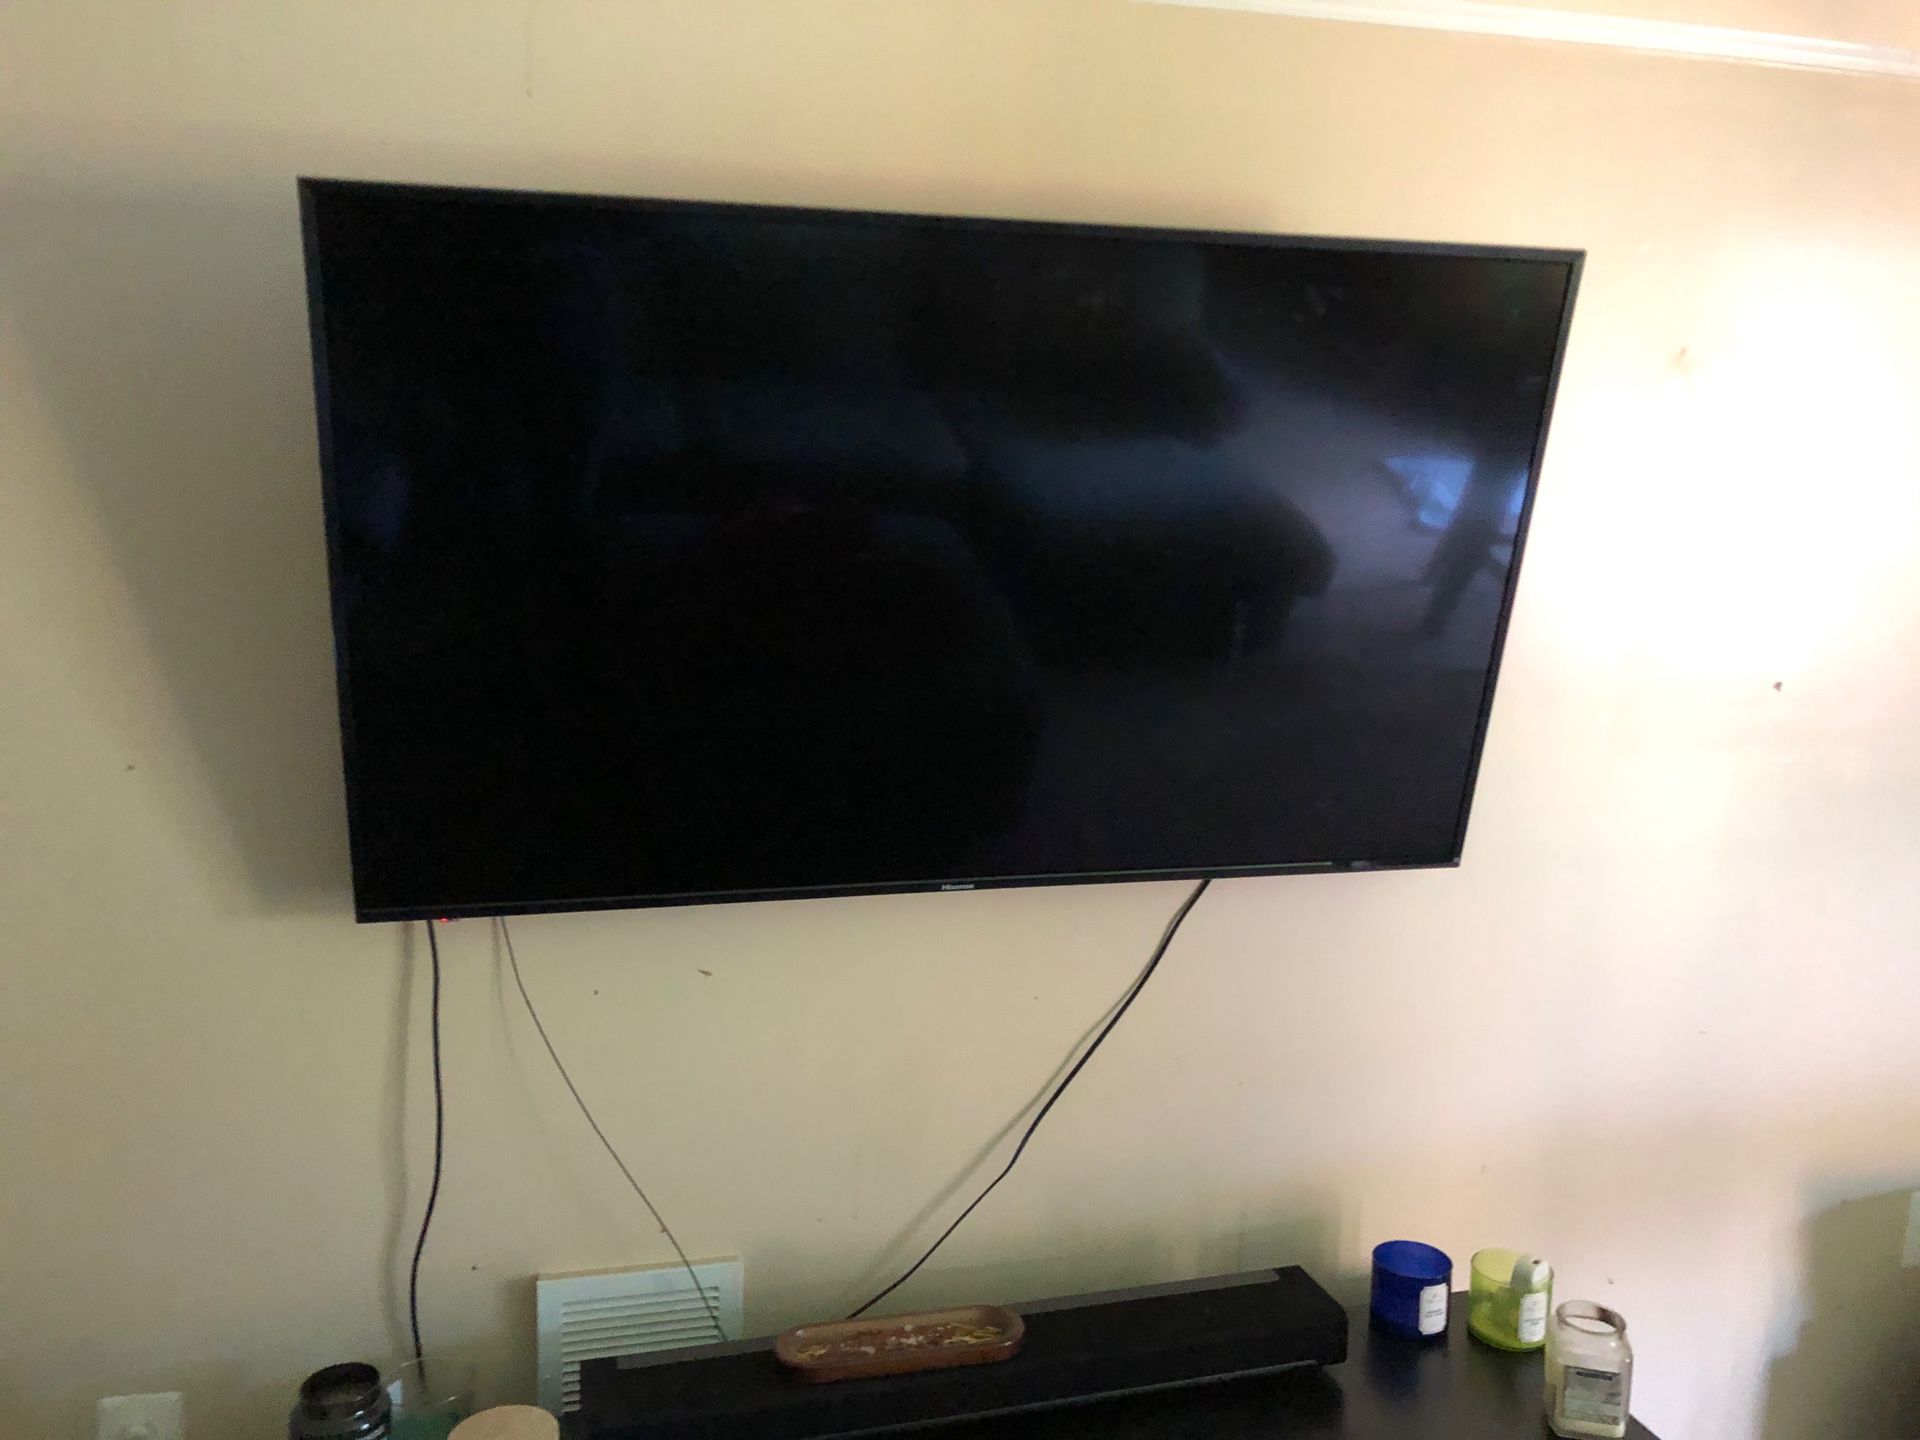 Used 60 inch Hisense TV 9/10 condition for sale!